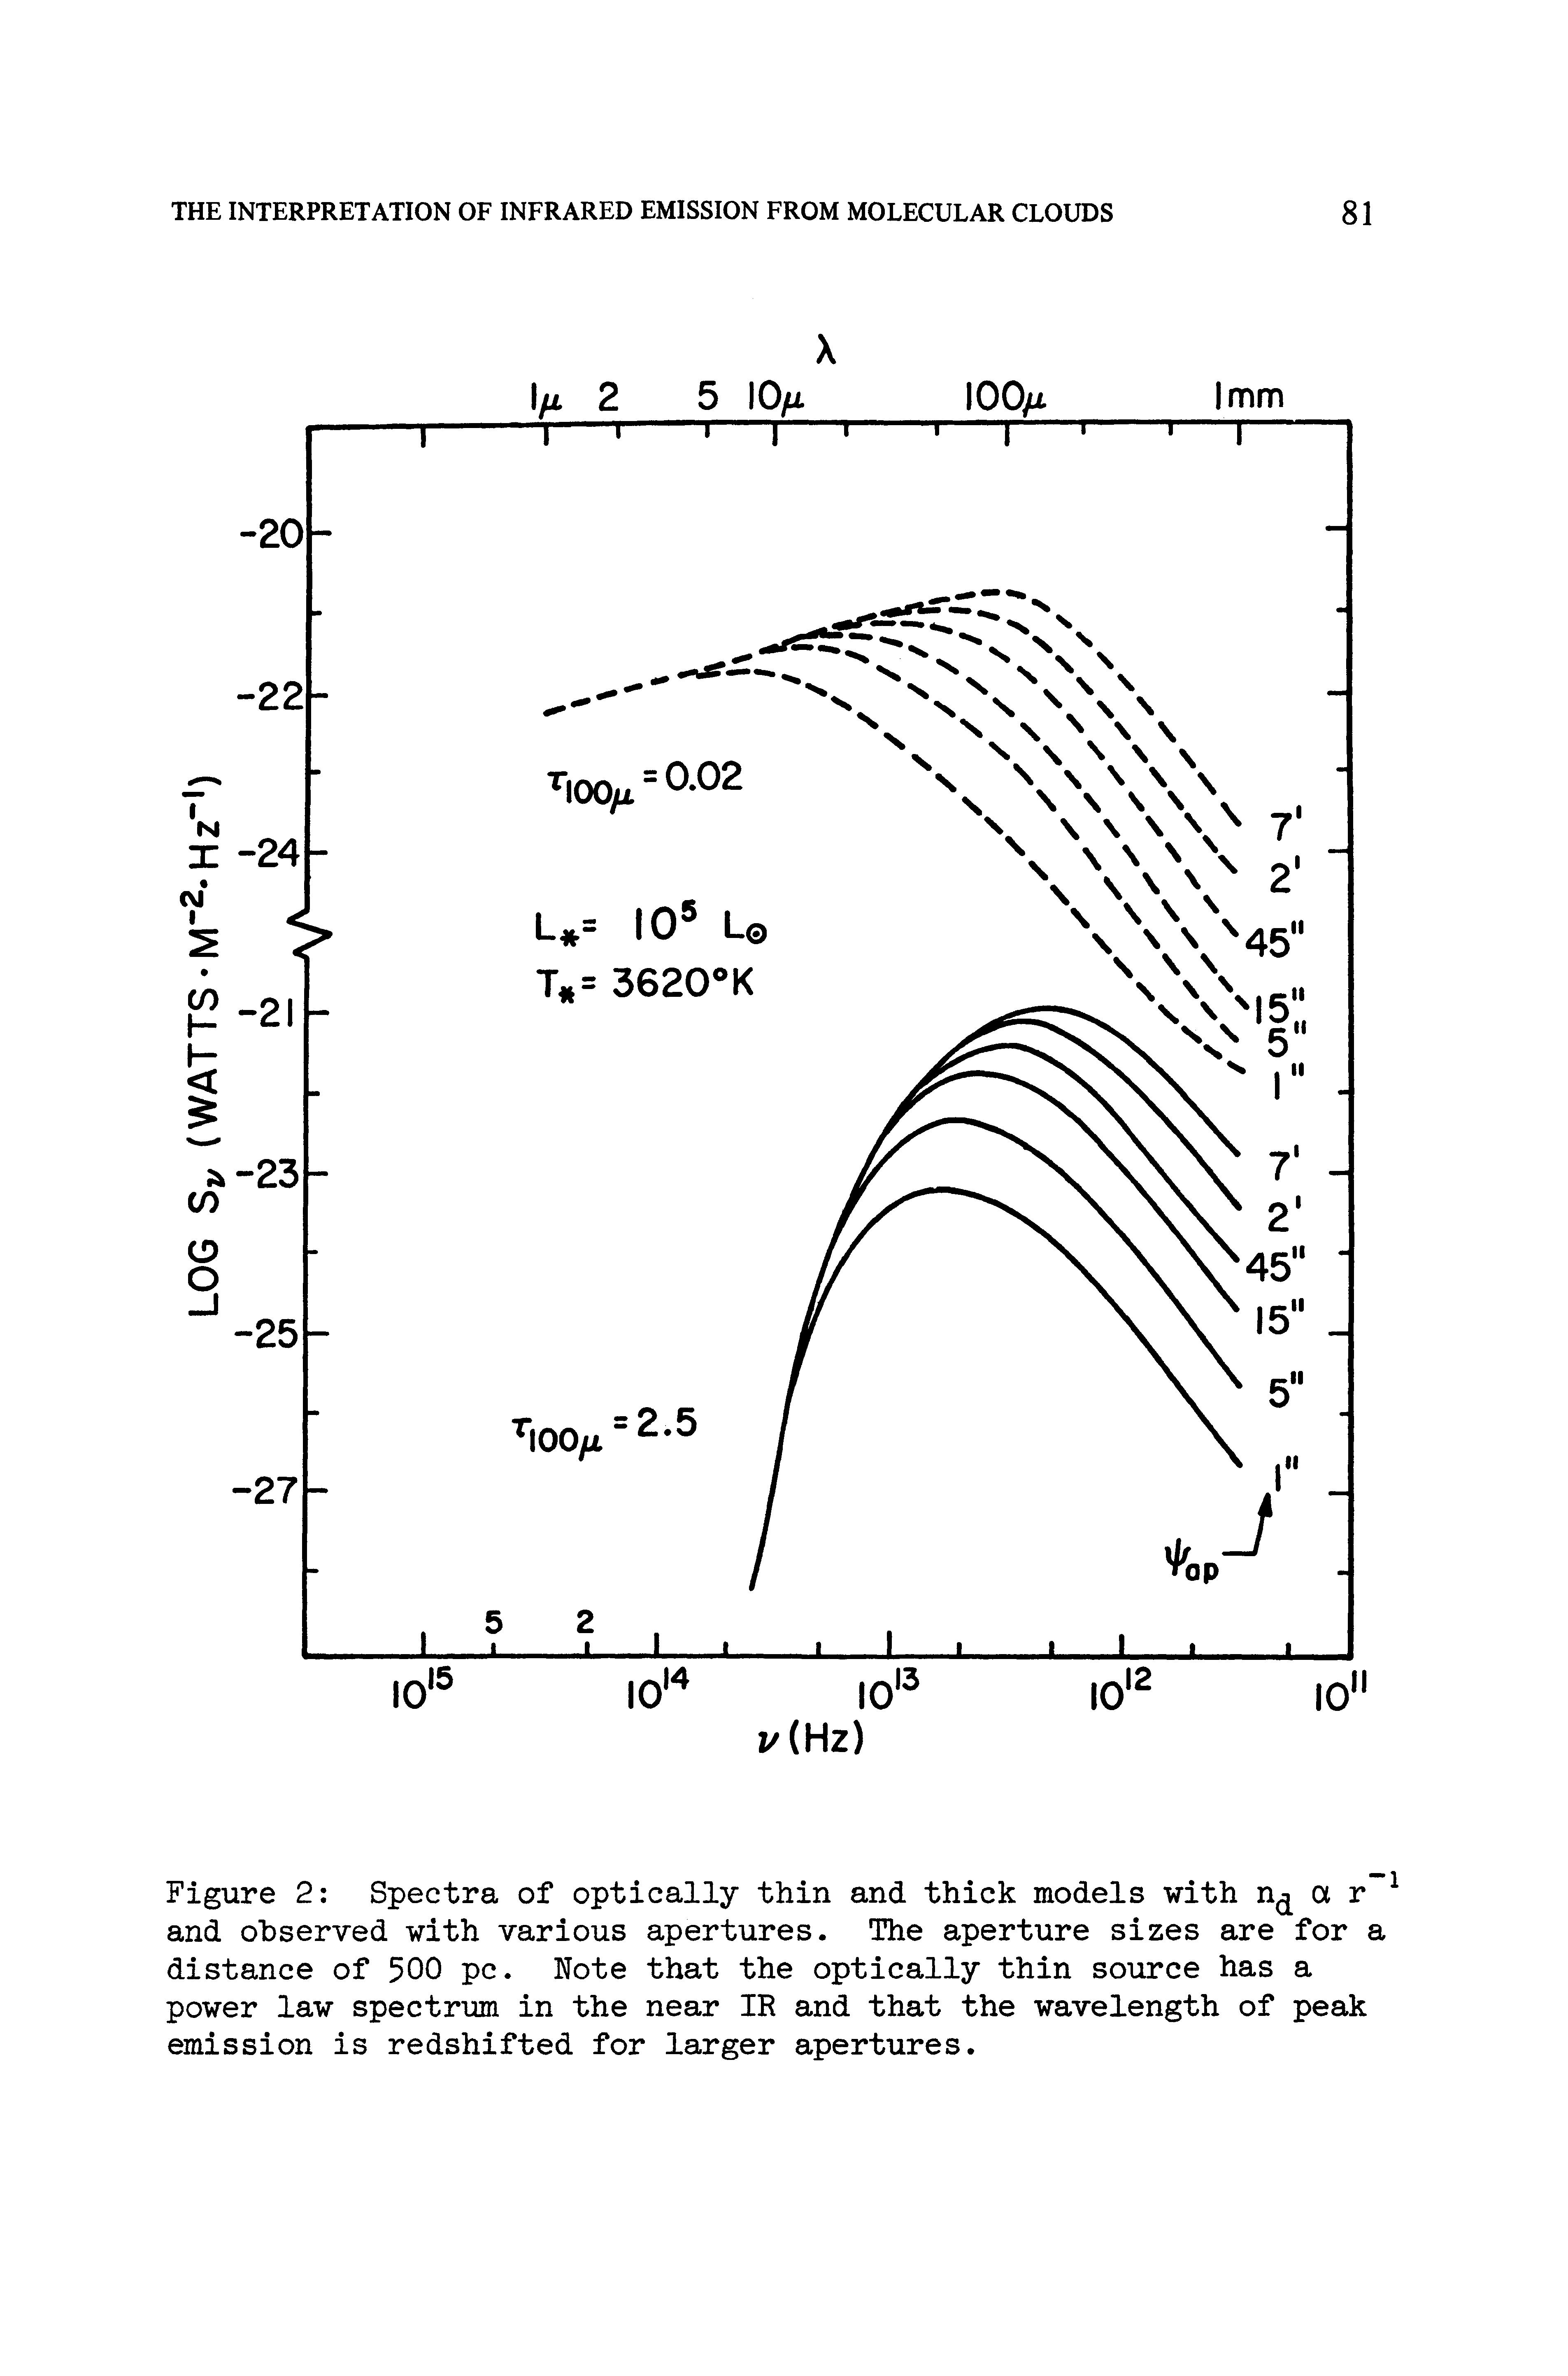 Figure 2 Spectra of optically thin and thick models with n a r and observed with various apertures. The aperture sizes are for a distance of 500 pc. Note that the optically thin source has a power law spectrum in the near IR and that the wavelength of peak emission is redshifted for larger apertures.